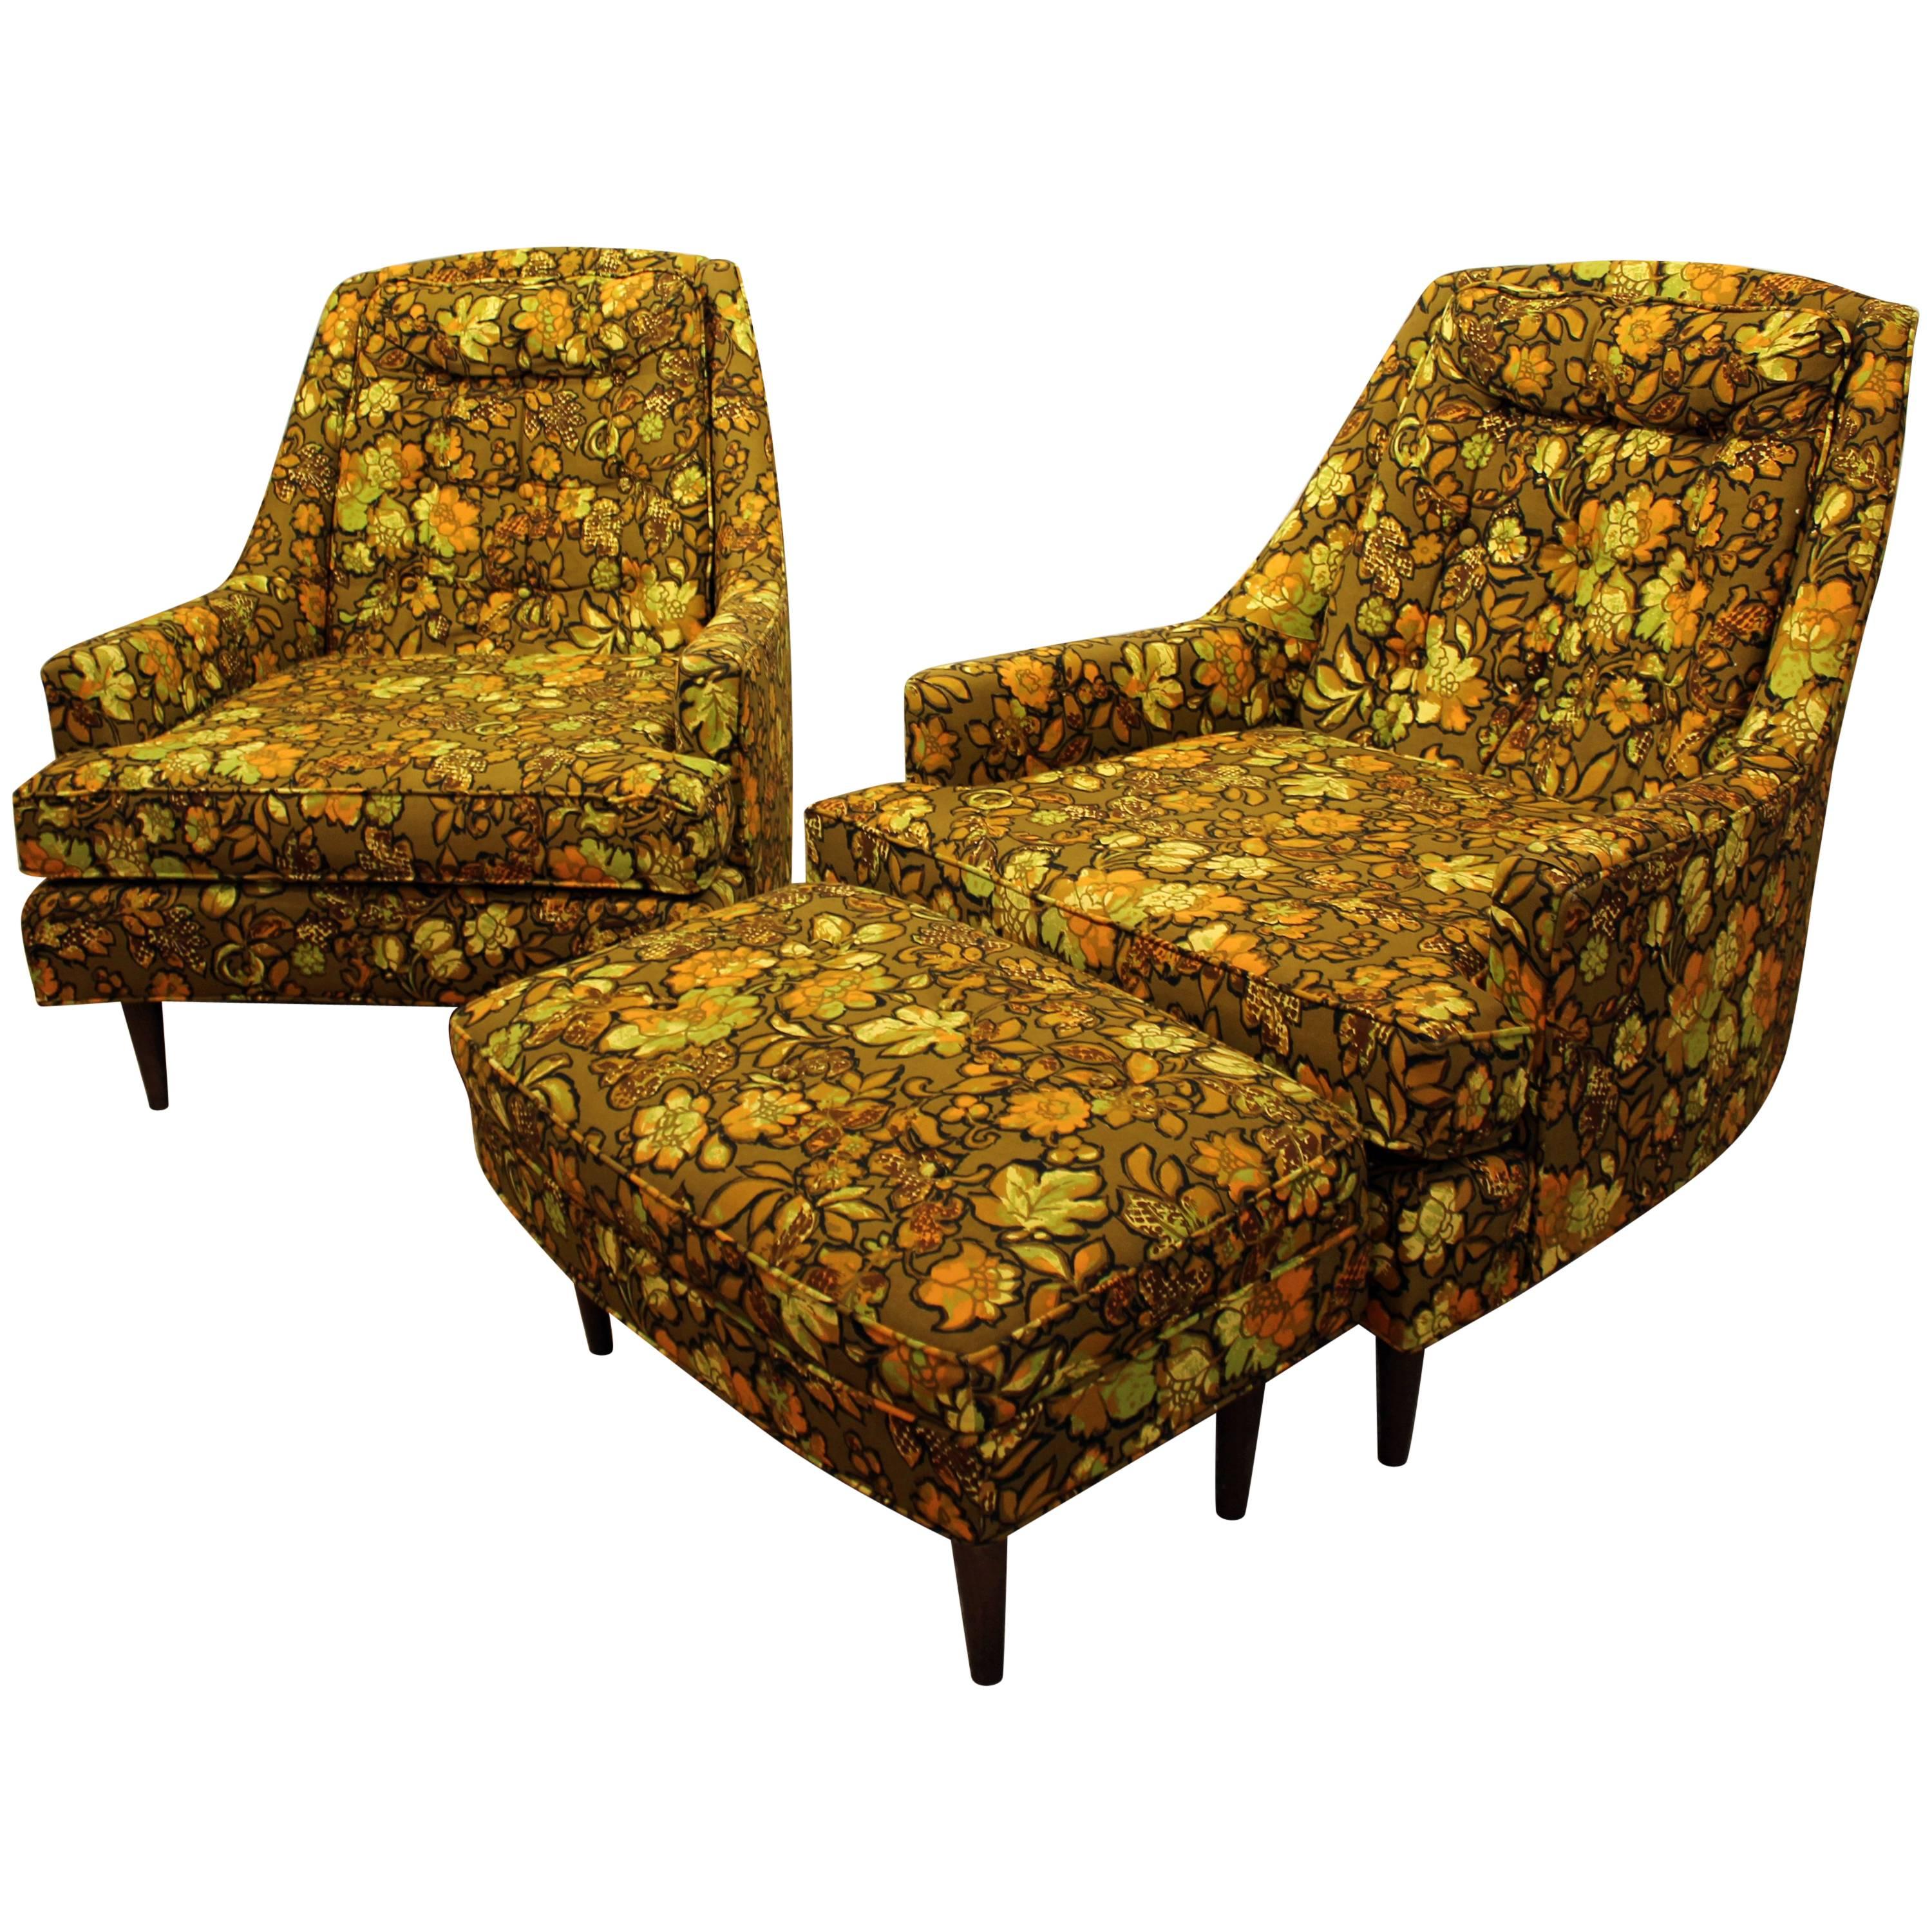 Mid-Century Modern Three-Piece Floral Lounge Chair and Ottoman Set